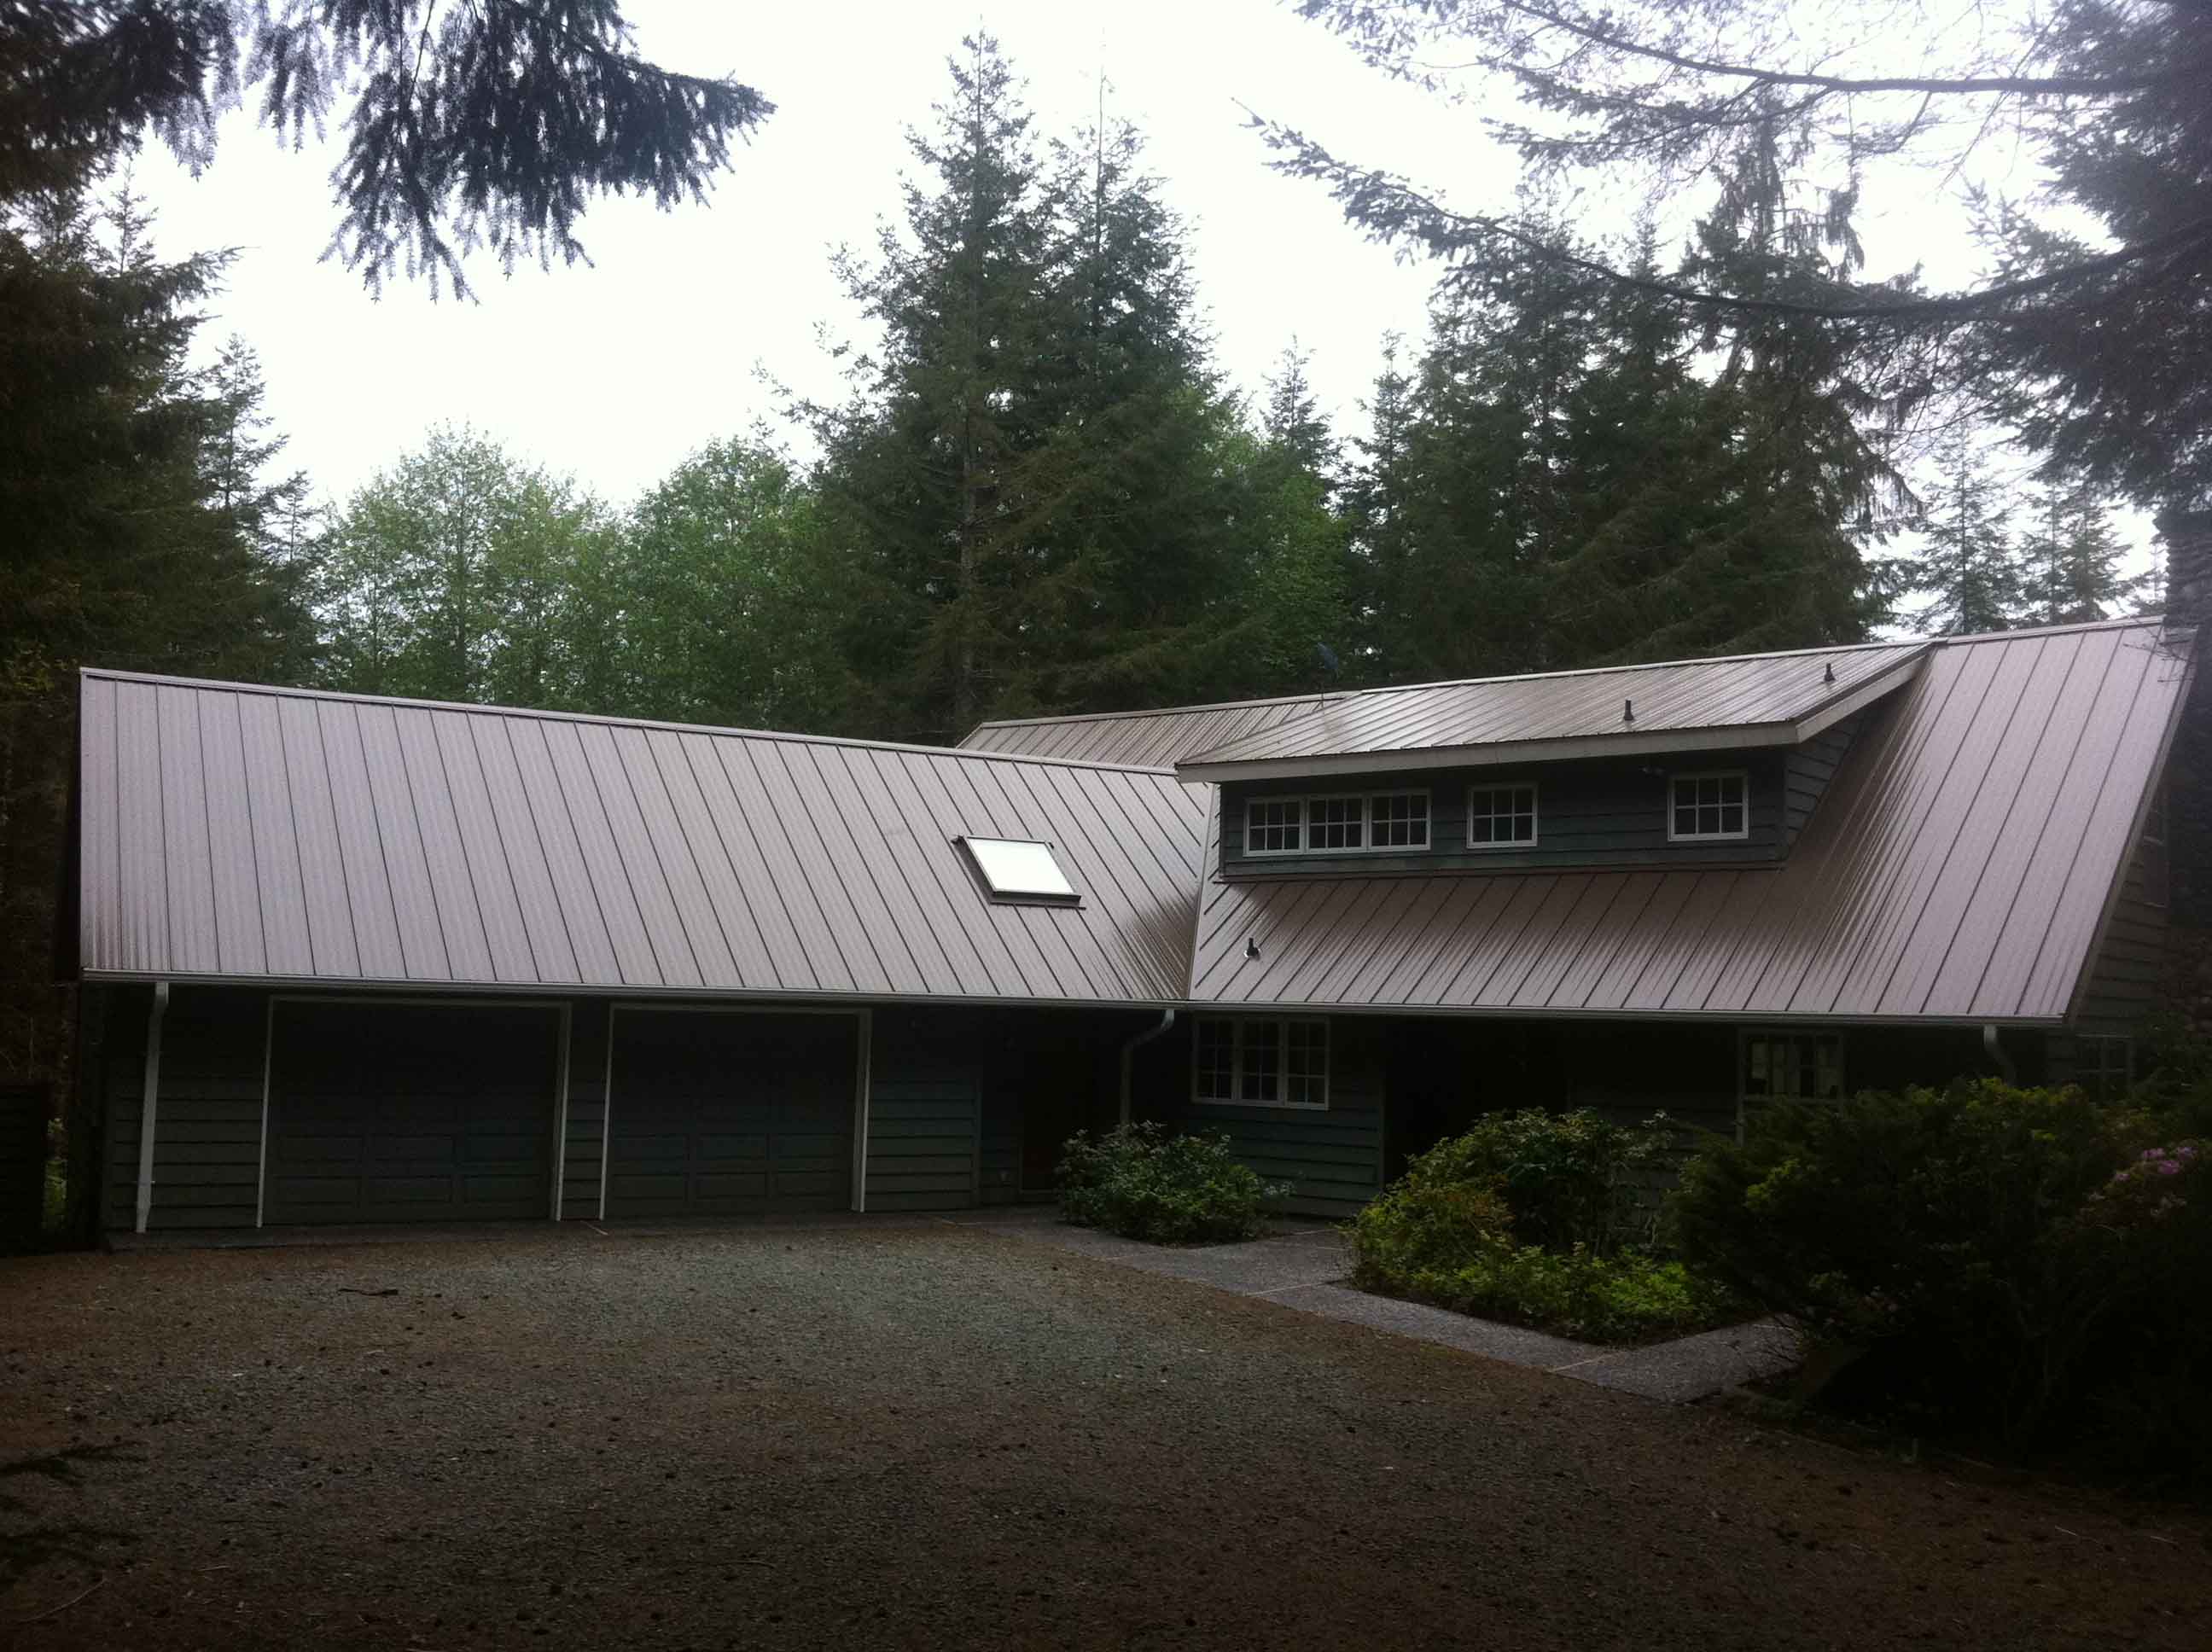 Loc-Seam roof on coast hme. Metal roofing durable for harsh weather